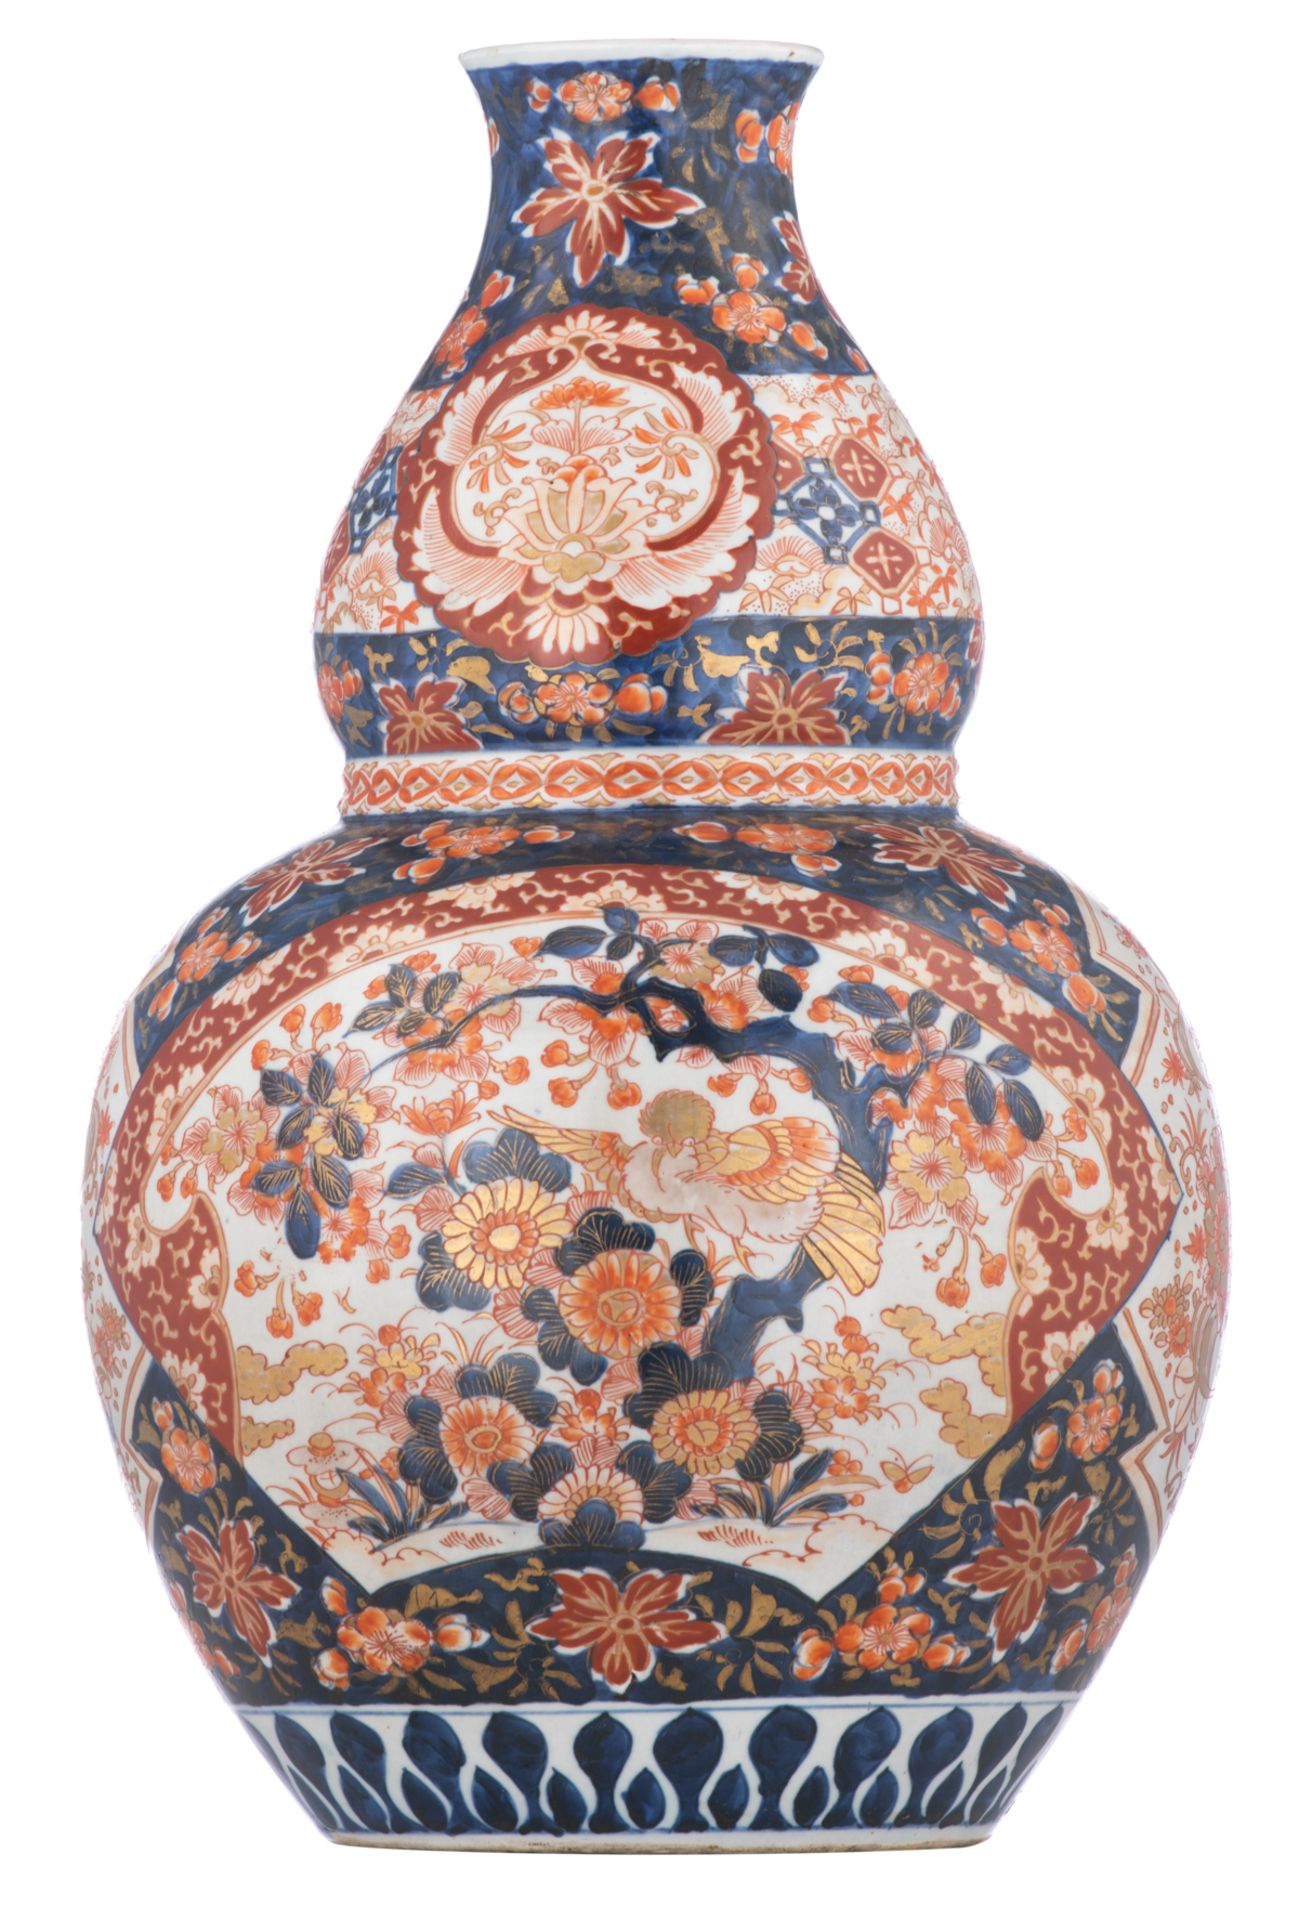 A Japanese Imari double gourd vase, decorated with birds on a flower branch, 19thC, H 46,5 cm